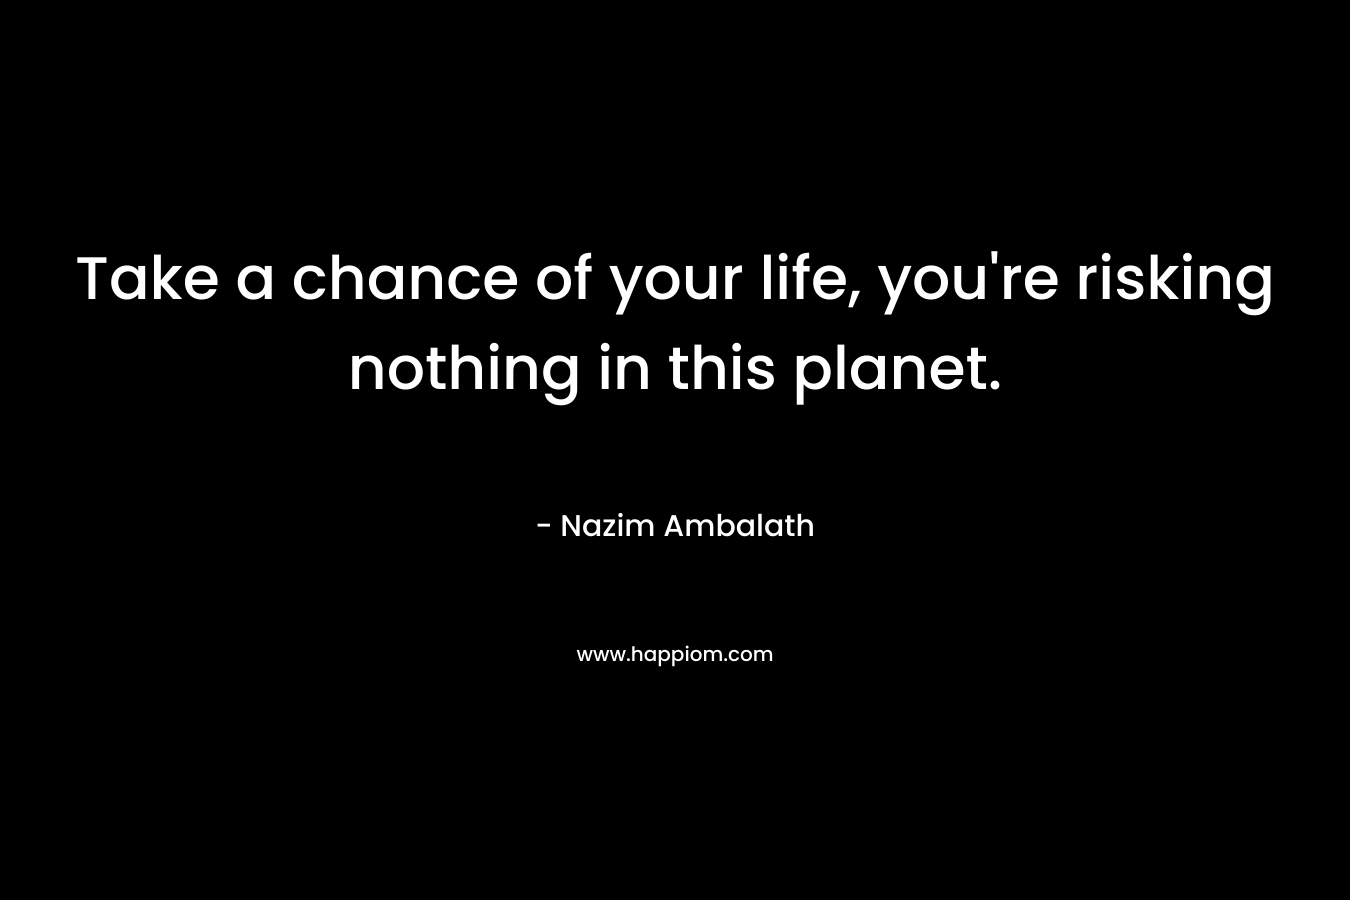 Take a chance of your life, you’re risking nothing in this planet. – Nazim Ambalath